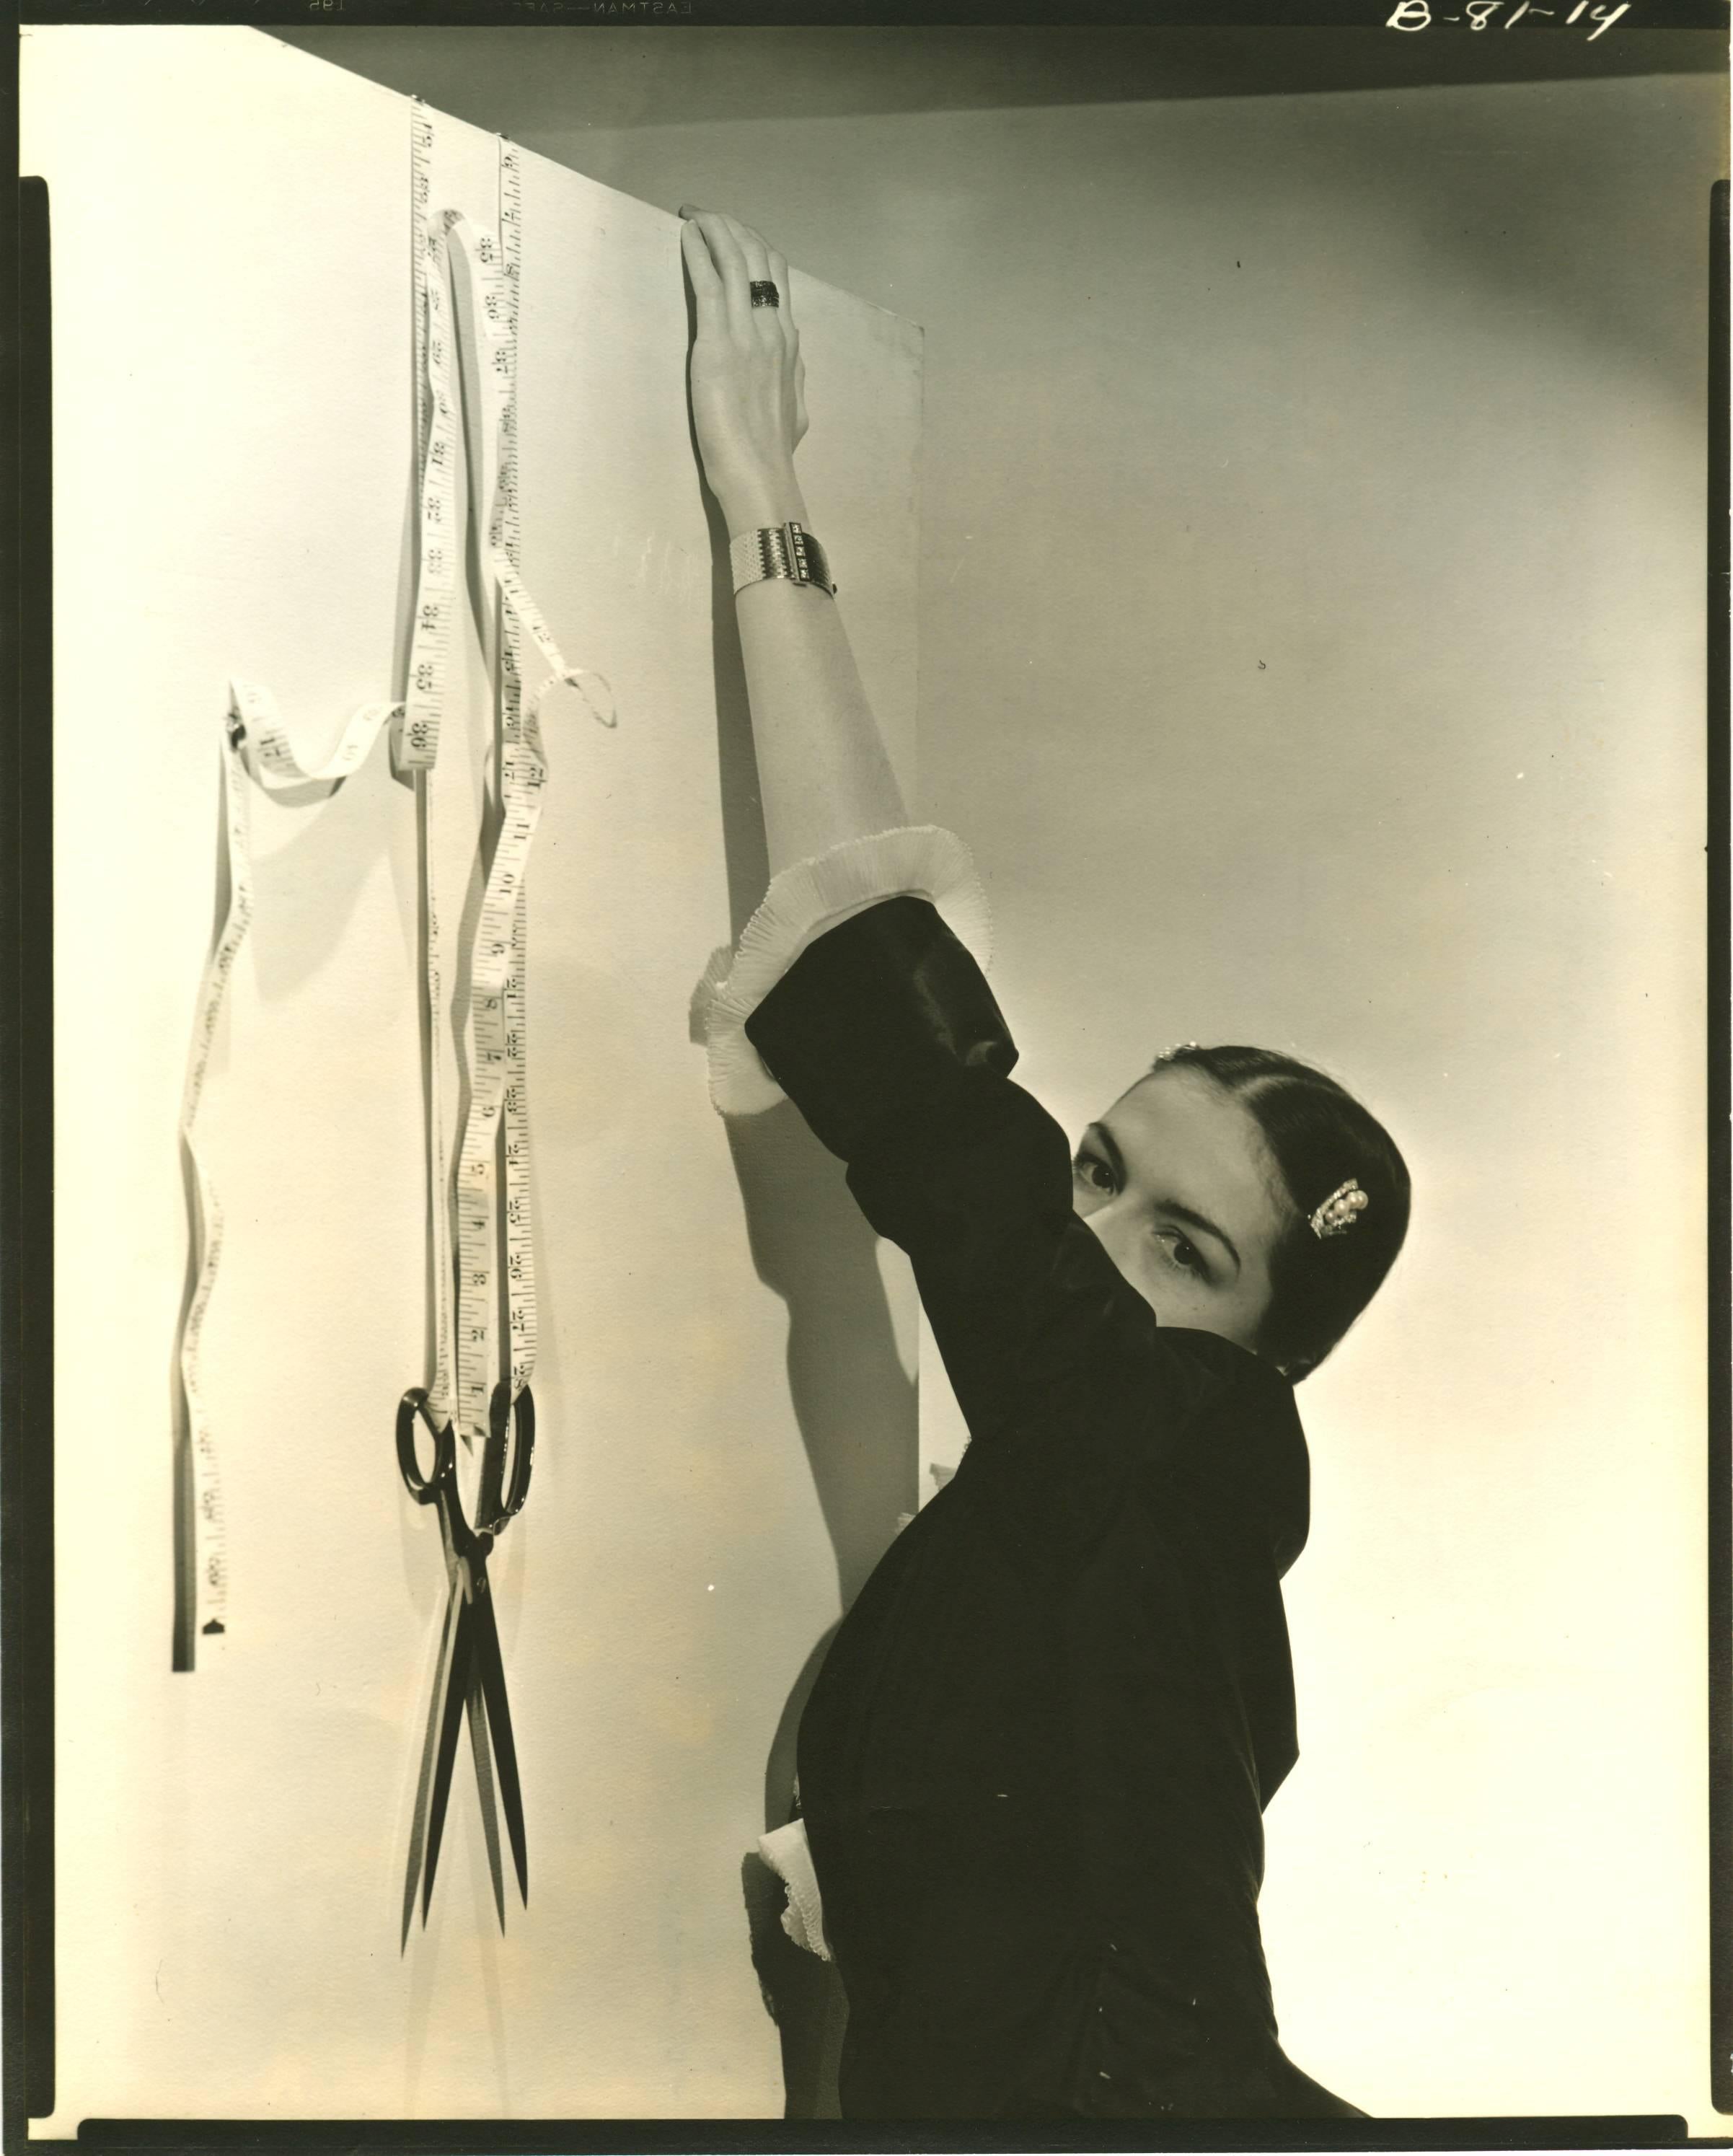 Cecil Beaton Black and White Photograph - Surreal Vignette, Ruth Ford with tapemeasure.